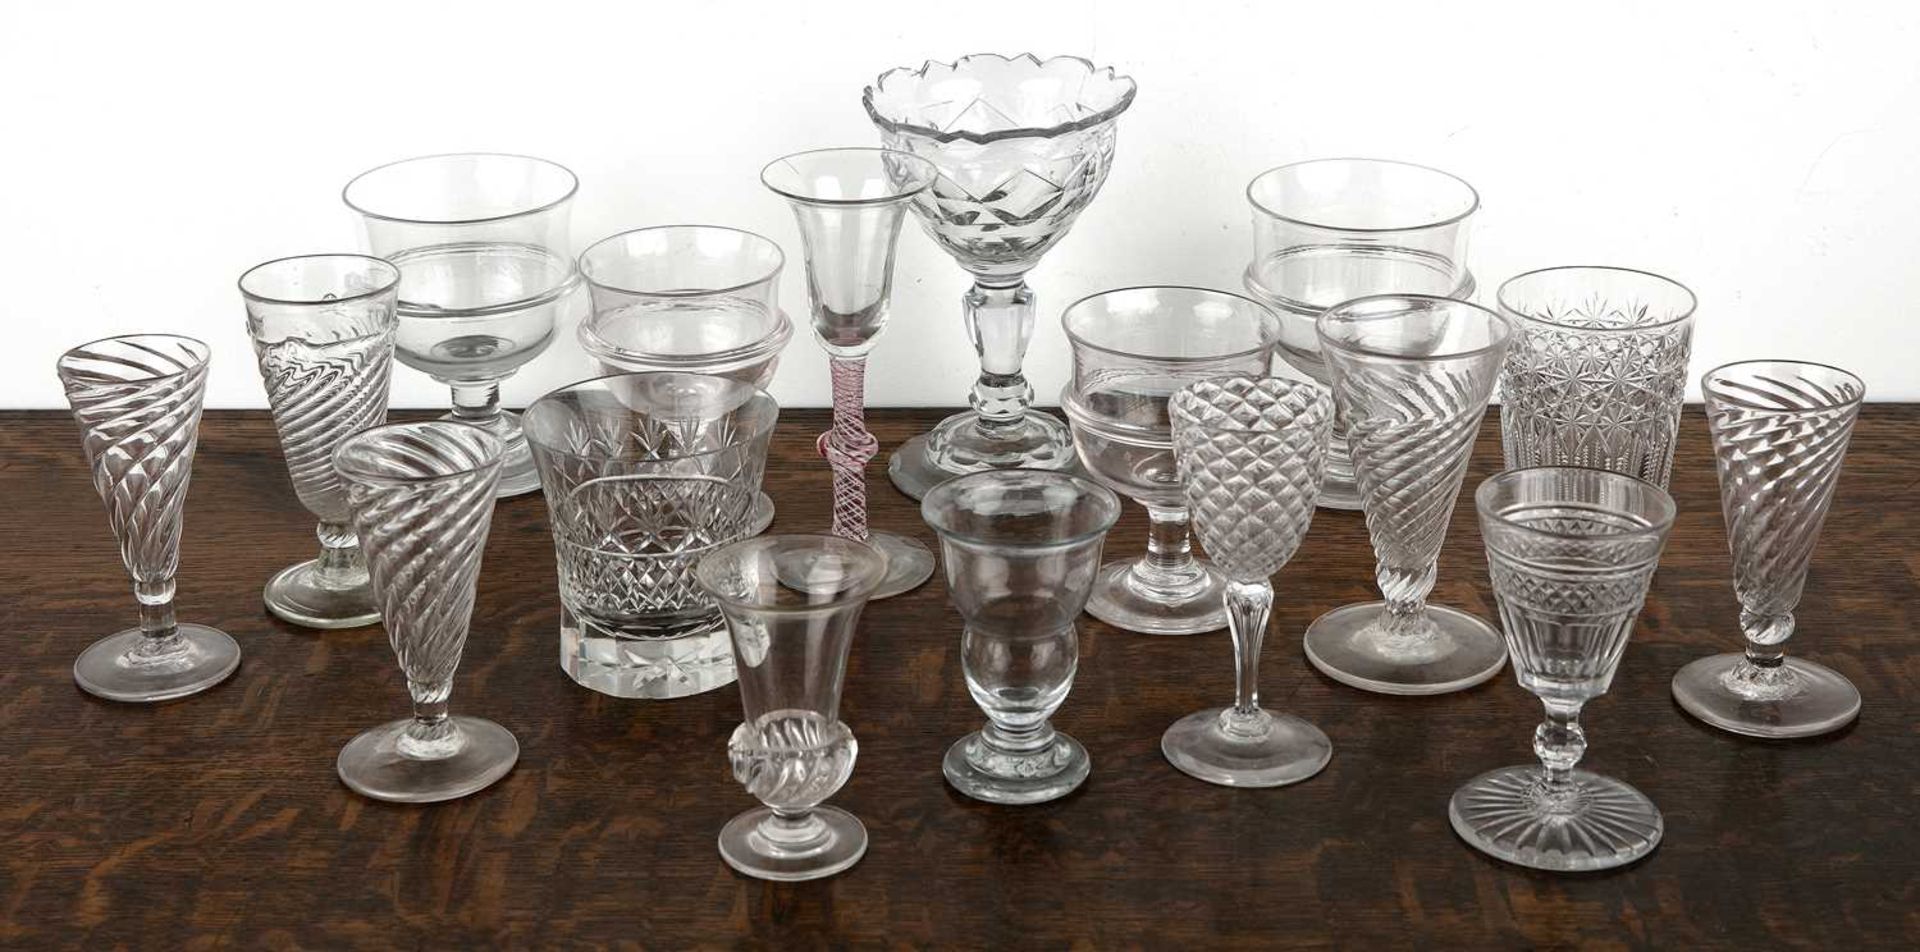 Group of glassware English, 18th/19th Century to include a wine glass with a coloured spiral twist